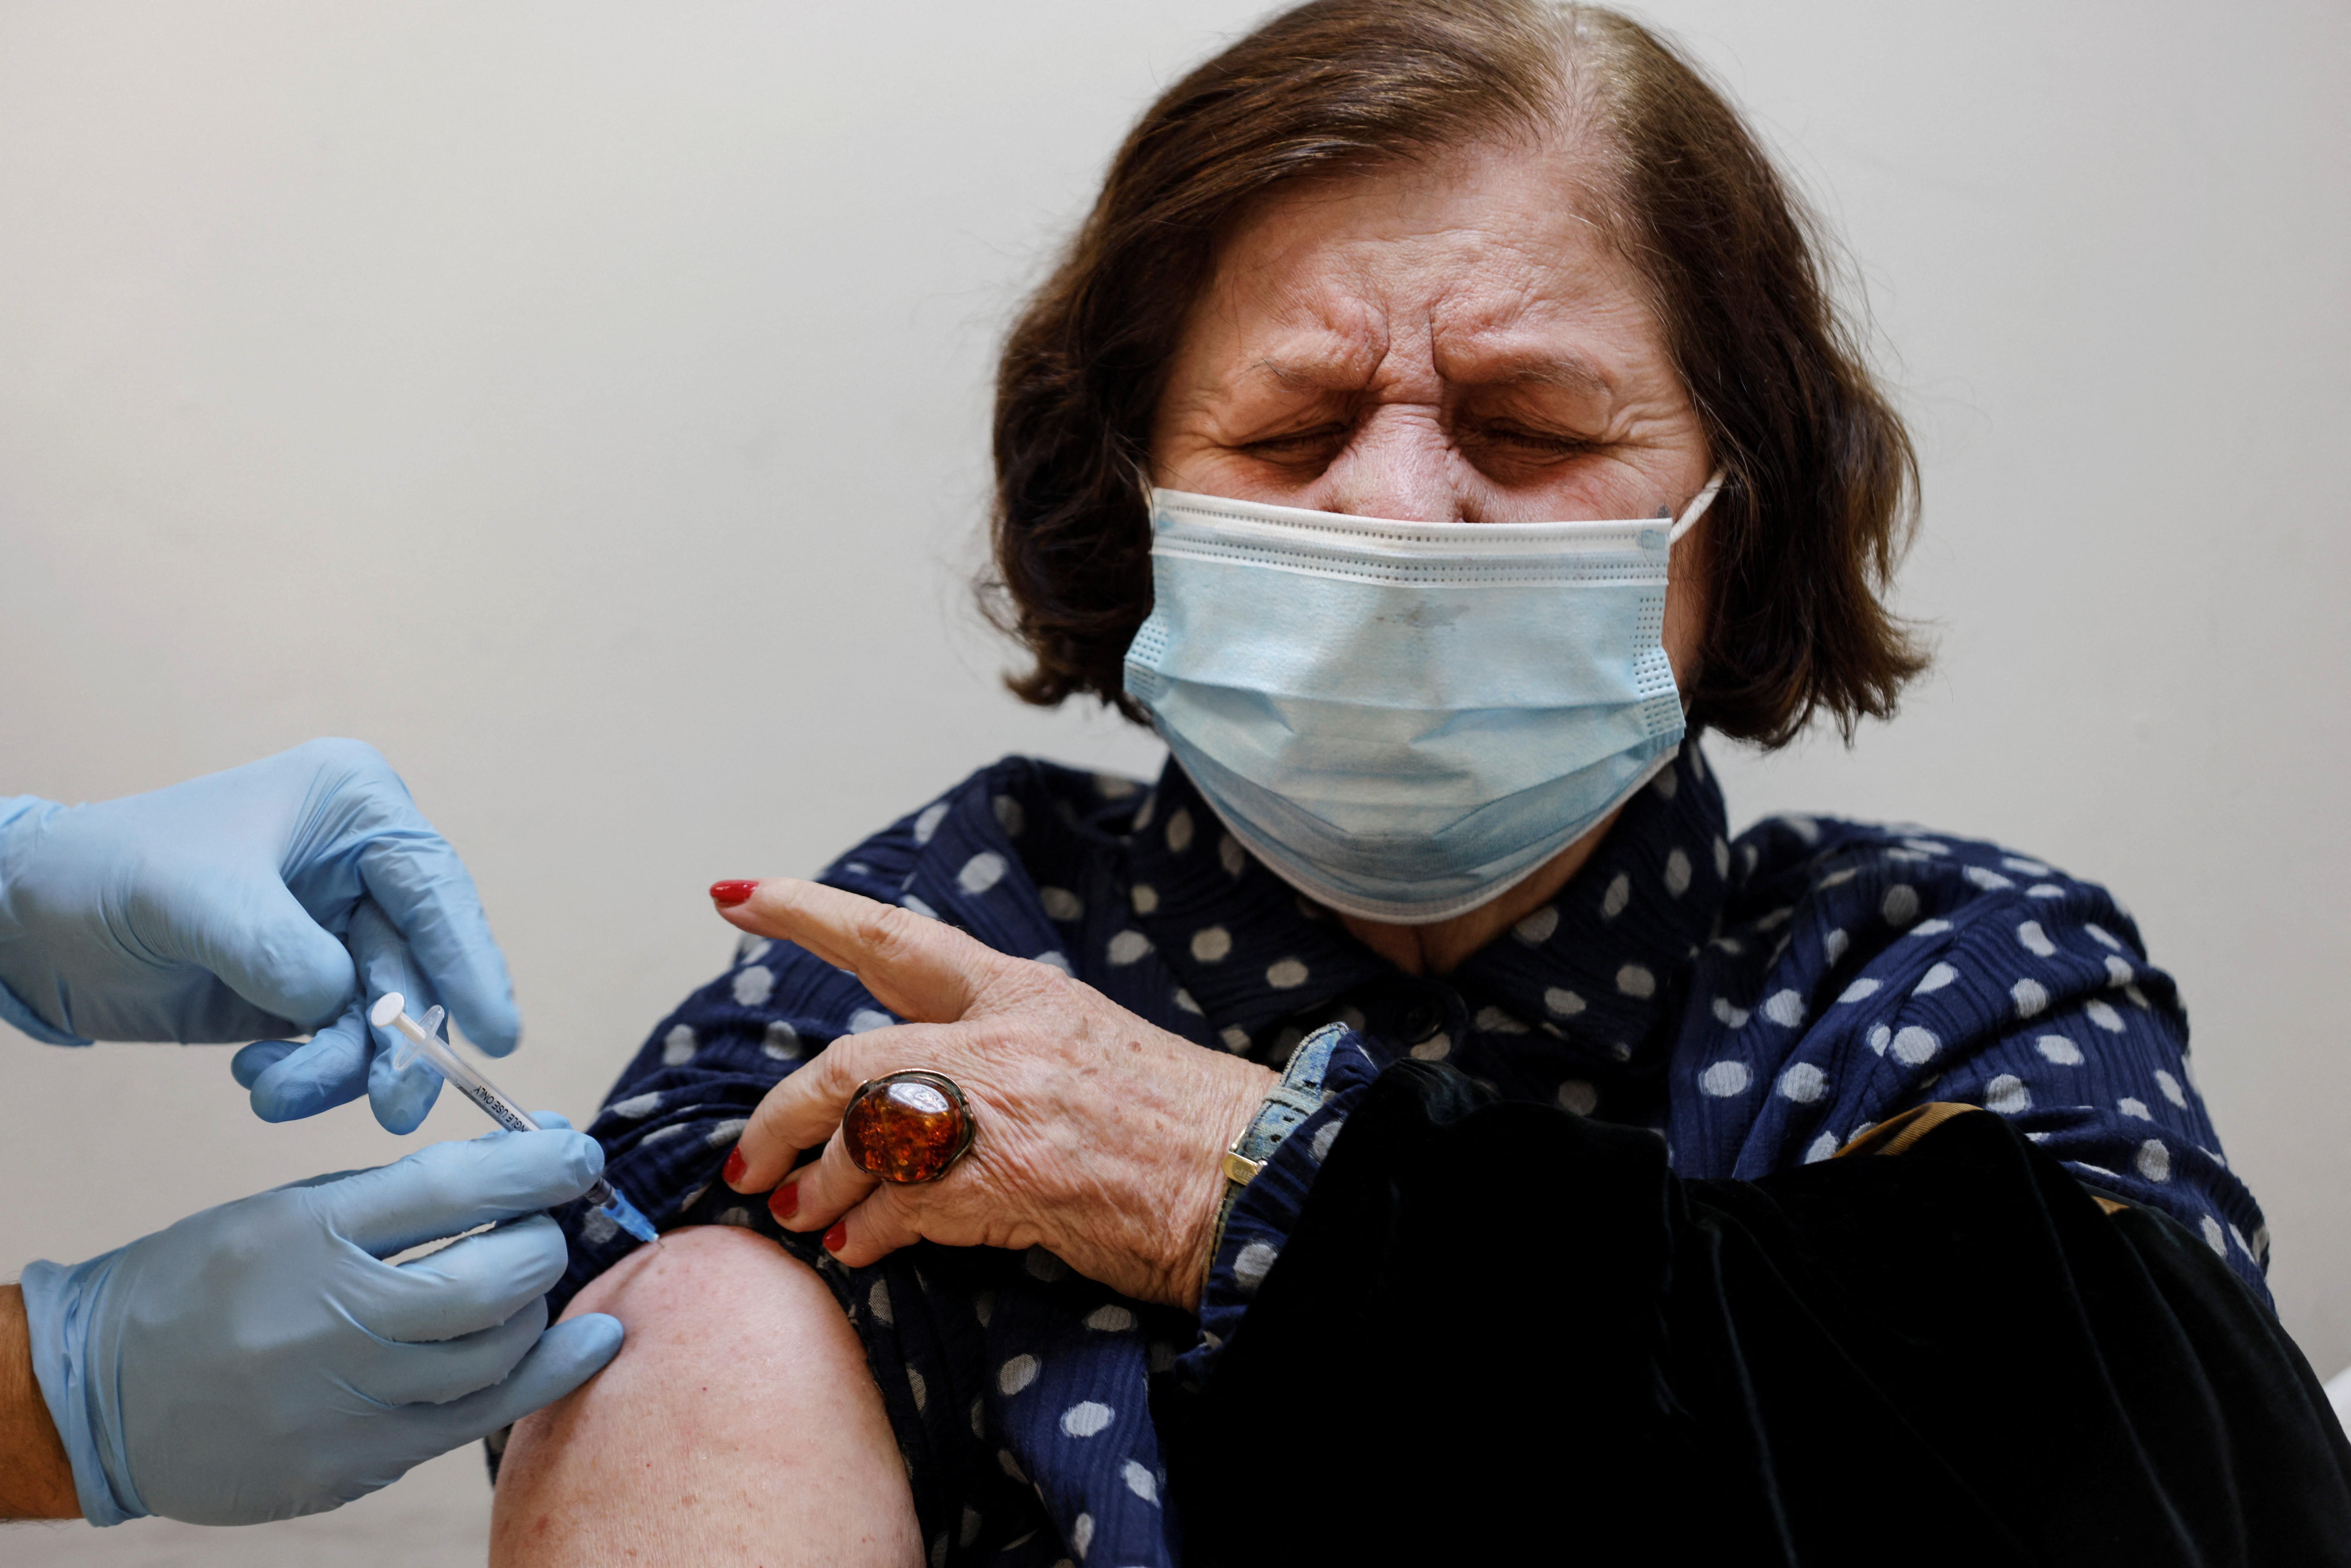 A woman receives the fourth dose of the coronavirus disease (COVID-19) vaccine after Israel approved a second booster shot for the immunocompromised, people over 60 years and medical staff, in Tel Aviv, Israel January 3, 2022